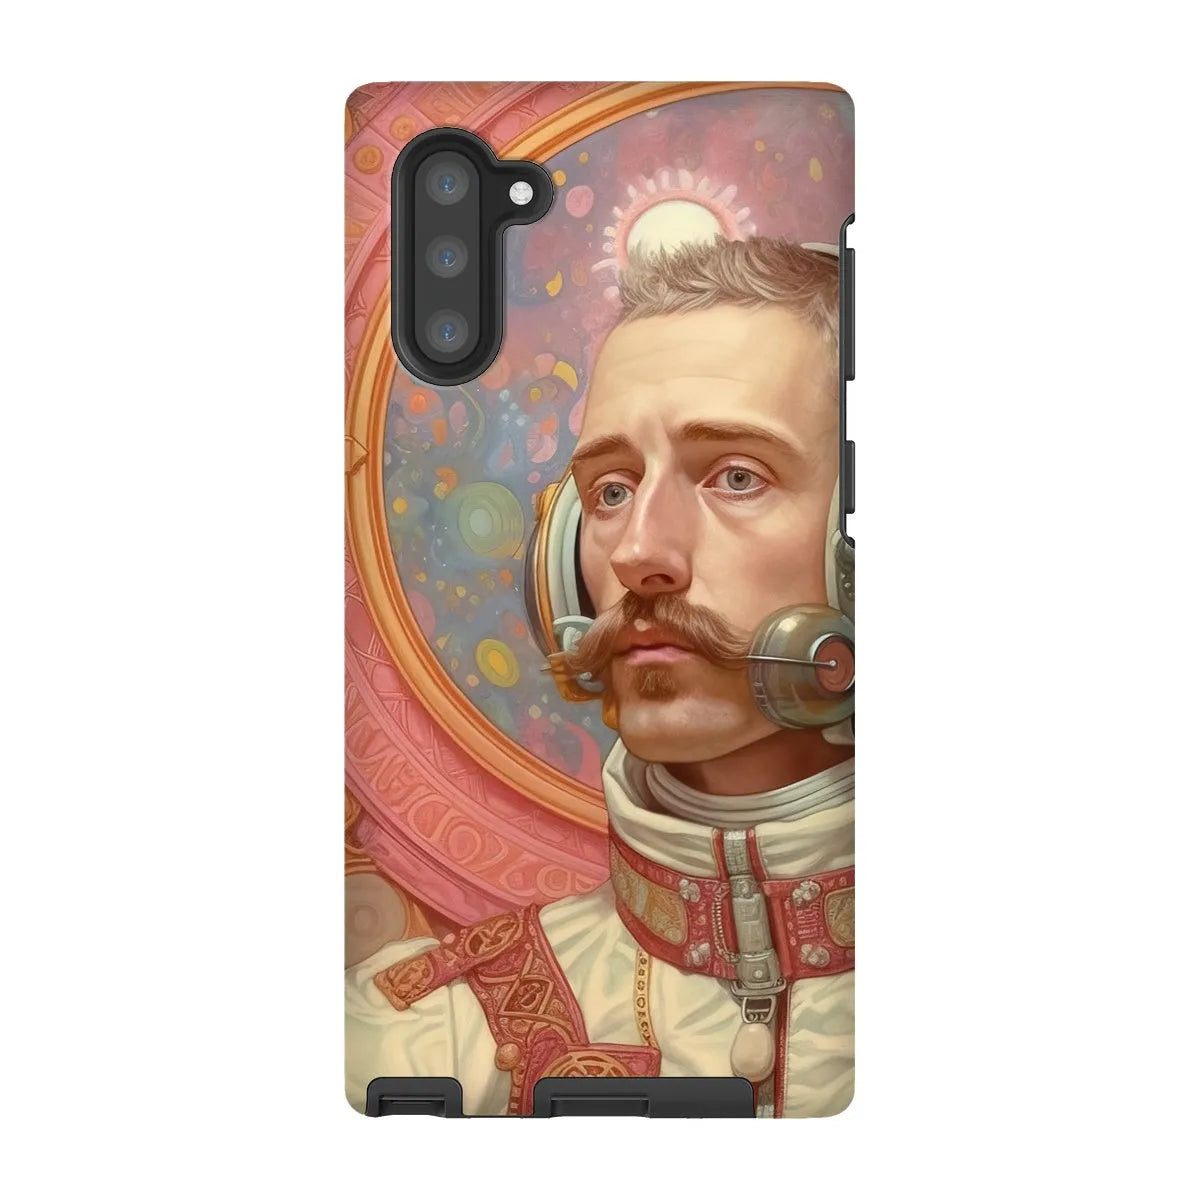 Axel The Gay Astronaut - Gay Aesthetic Art Phone Case - Samsung Galaxy Note 10 / Matte - Mobile Phone Cases - Aesthetic